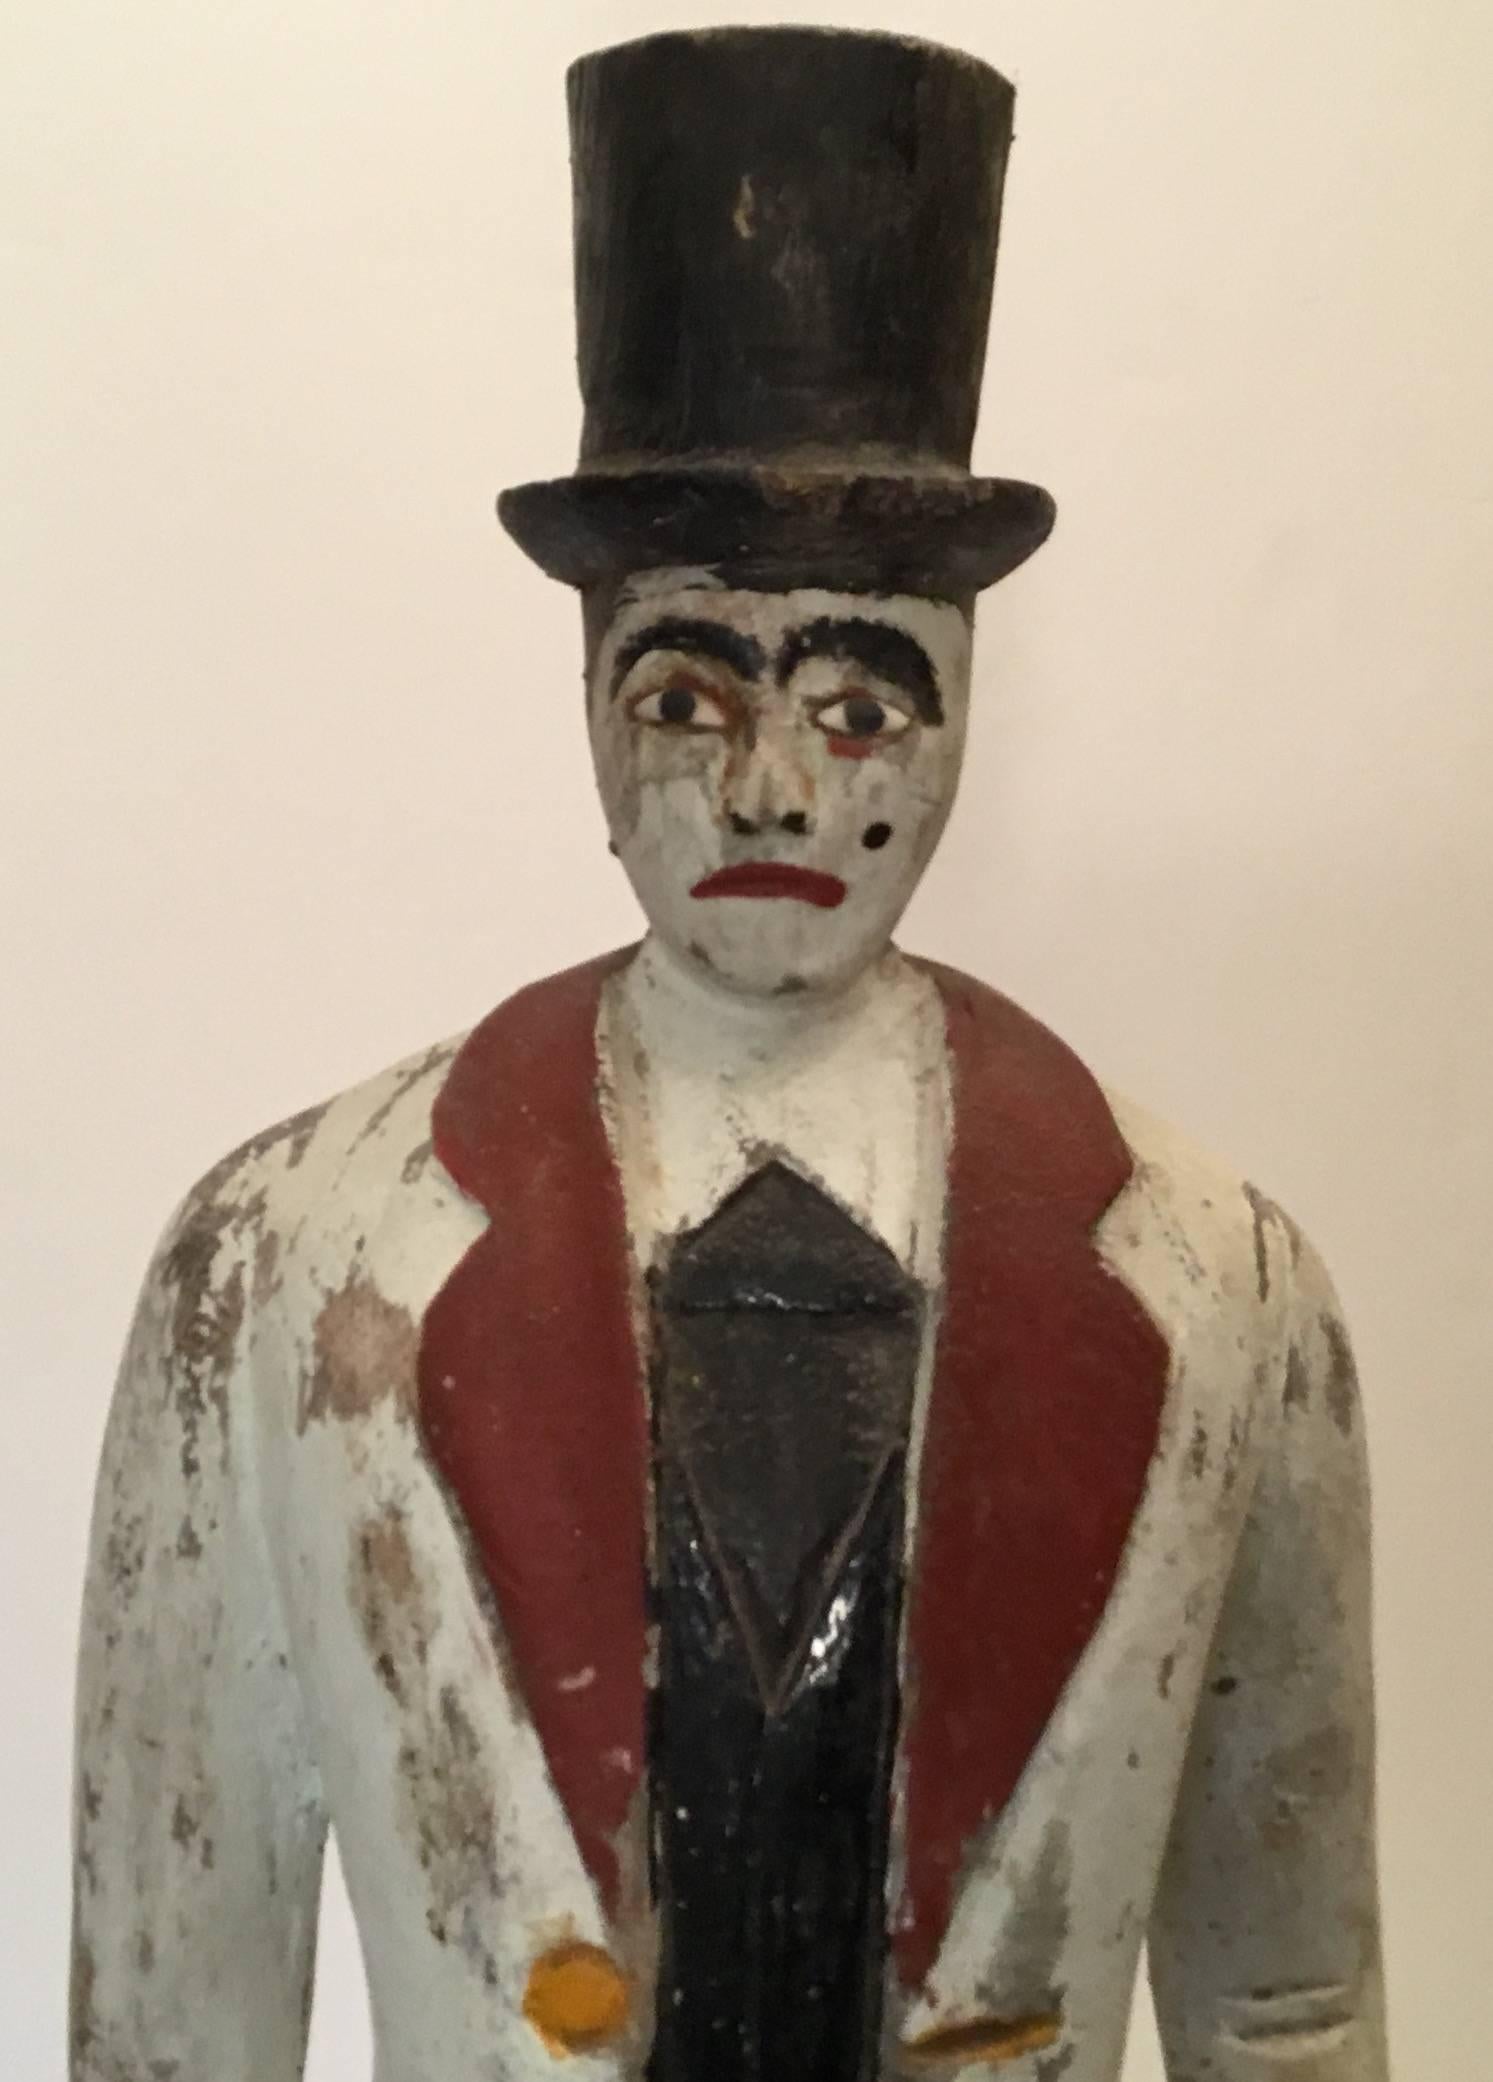 One of a kind wooden carnival Barker made of wood and hand painted, very 
expressive facial features, dapper top hat and tail. Classic piece of Americana.
Post on a wooden base.

As info, a Barker is a person who attempts to attract patrons to